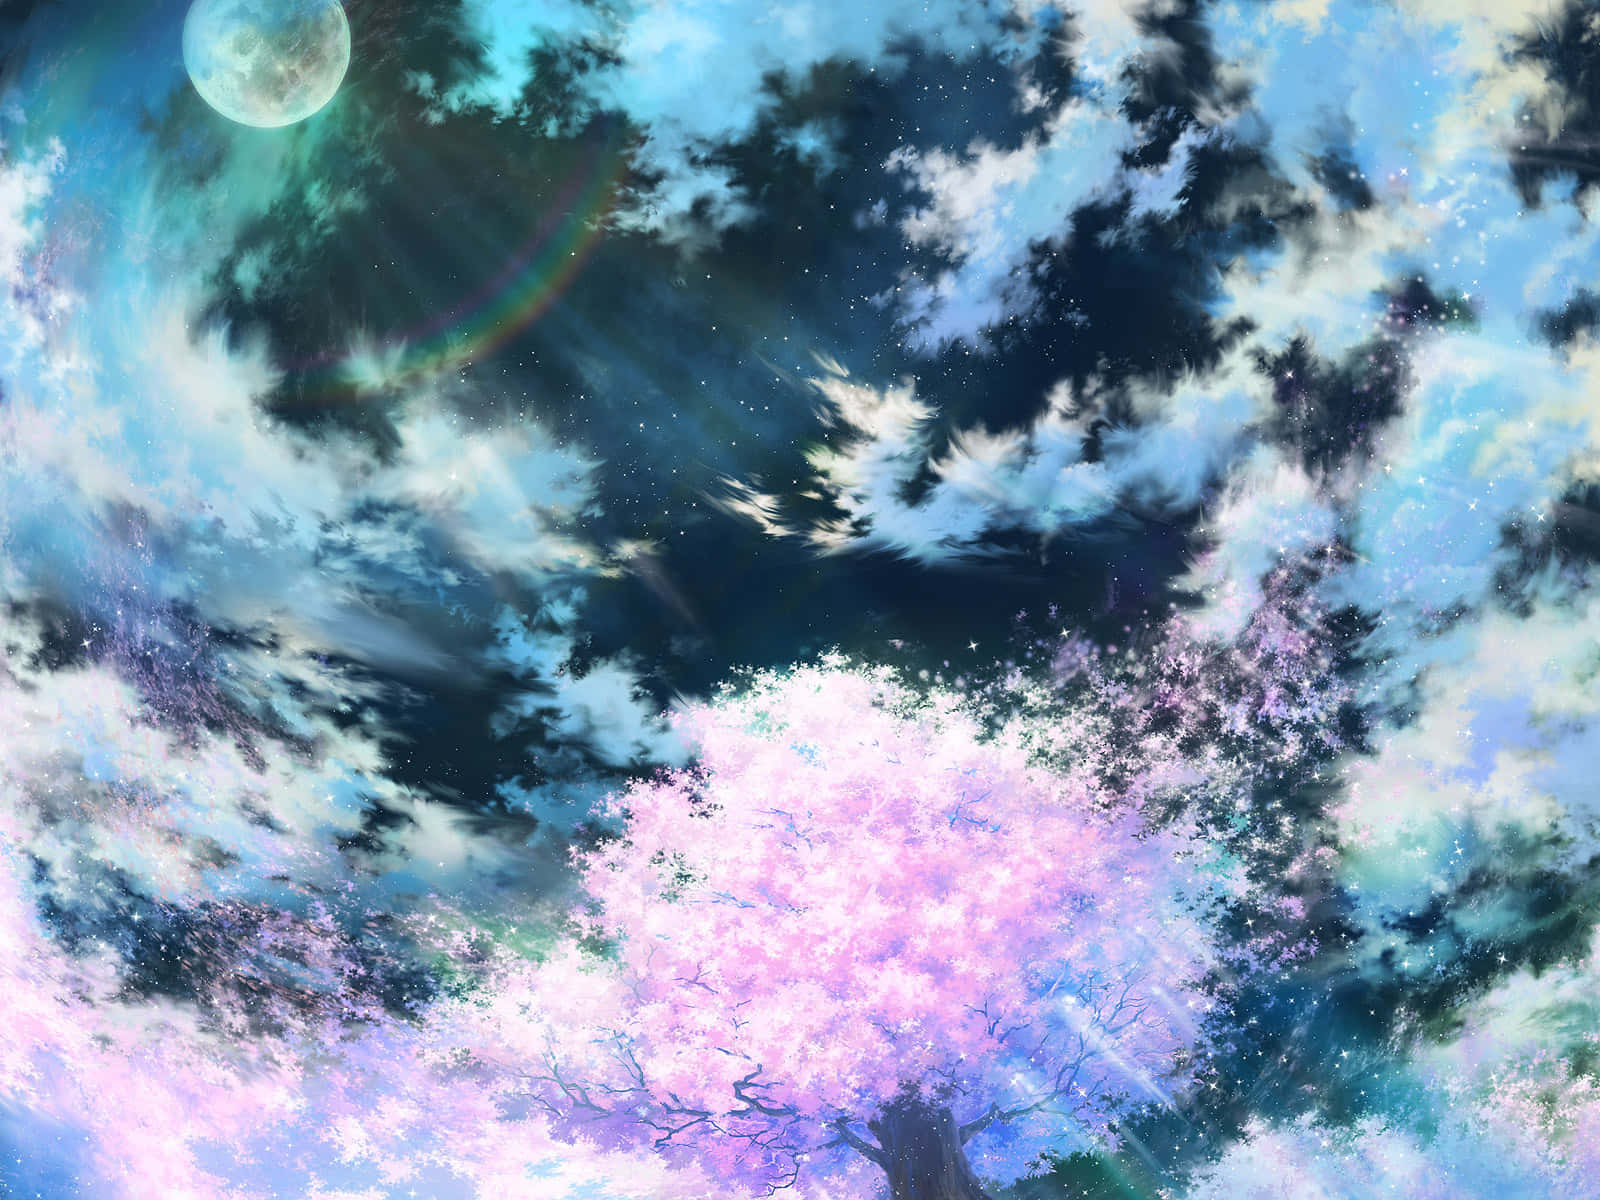 A Tree With Pink Flowers And Clouds In The Sky Wallpaper